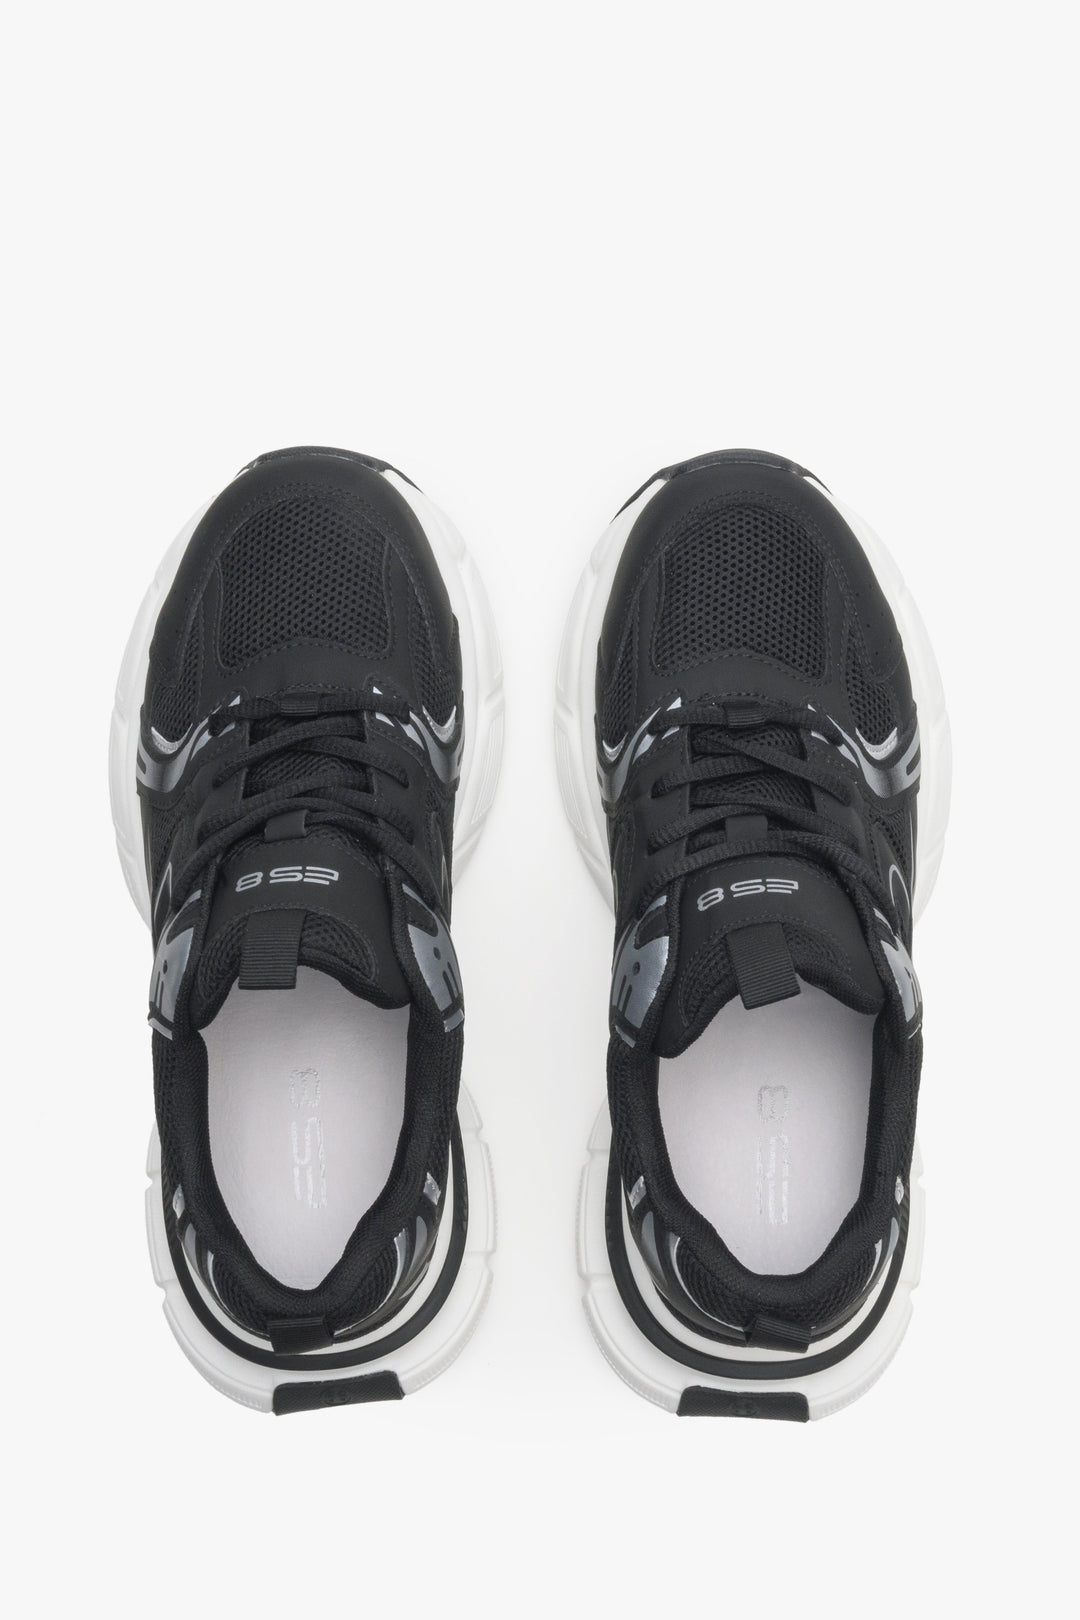 Women's black sneakers with mesh ES 8 - top view presentation of the model.